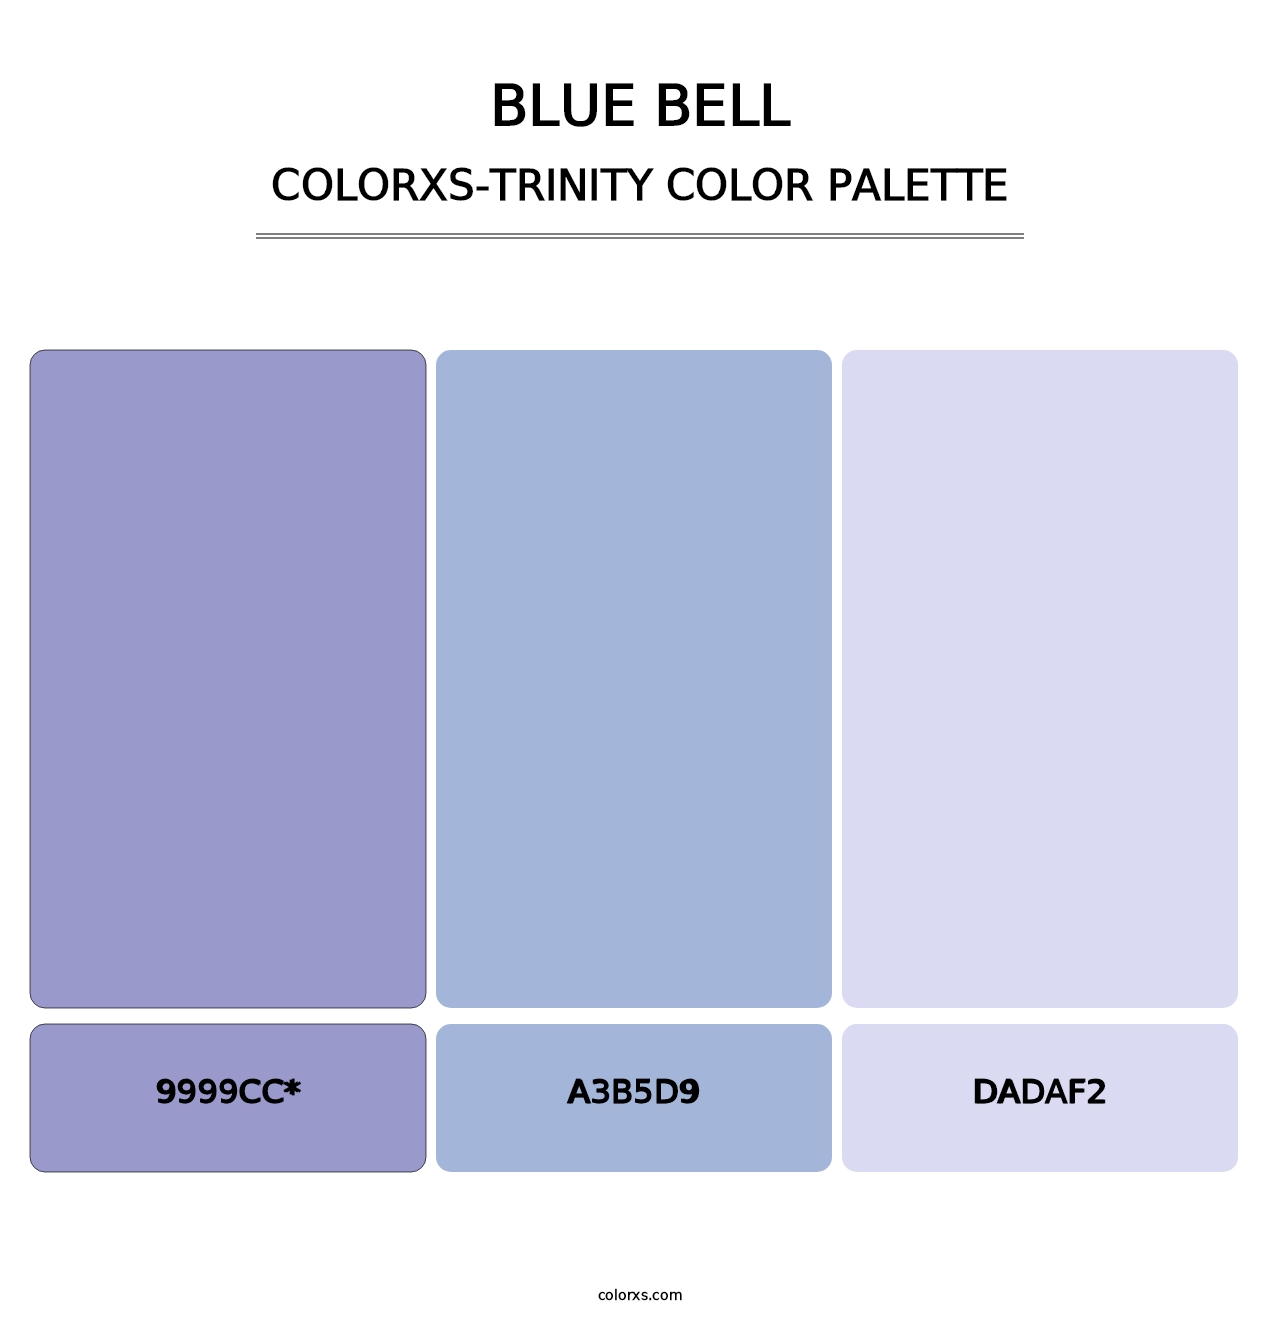 Blue Bell - Colorxs Trinity Palette